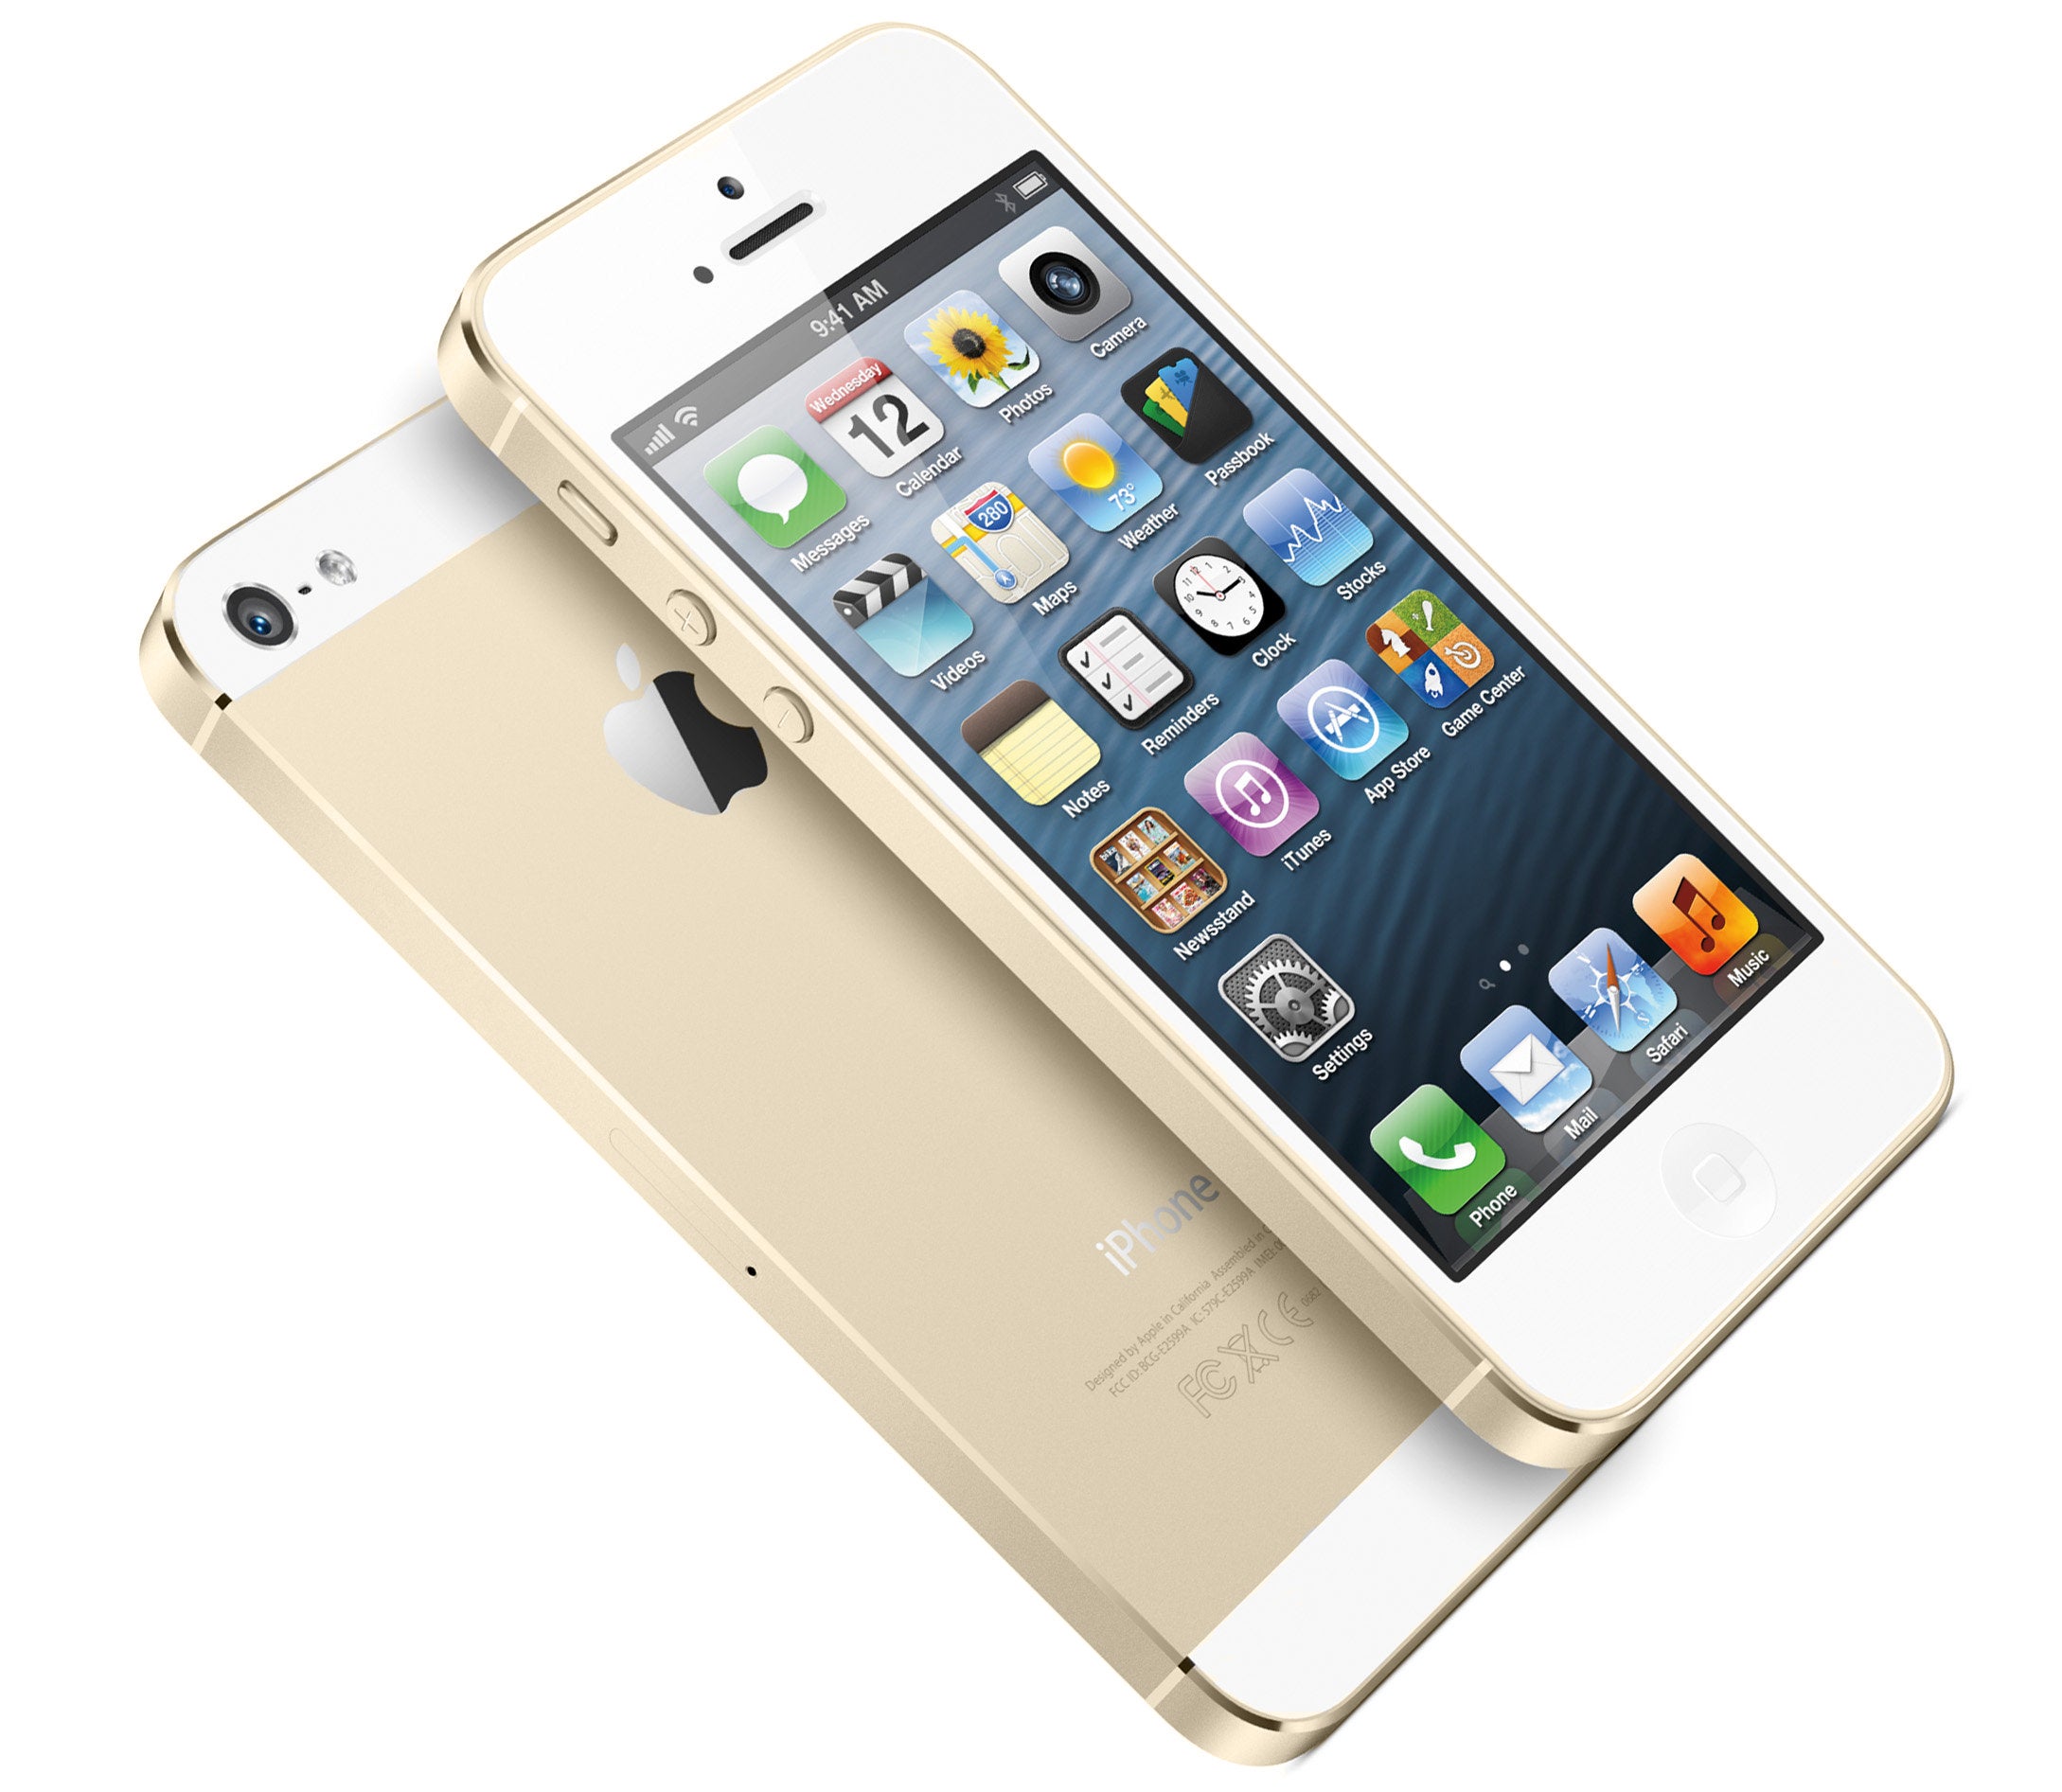 Apple iPhone 5S: 7 new features of the seventh generation iPhone